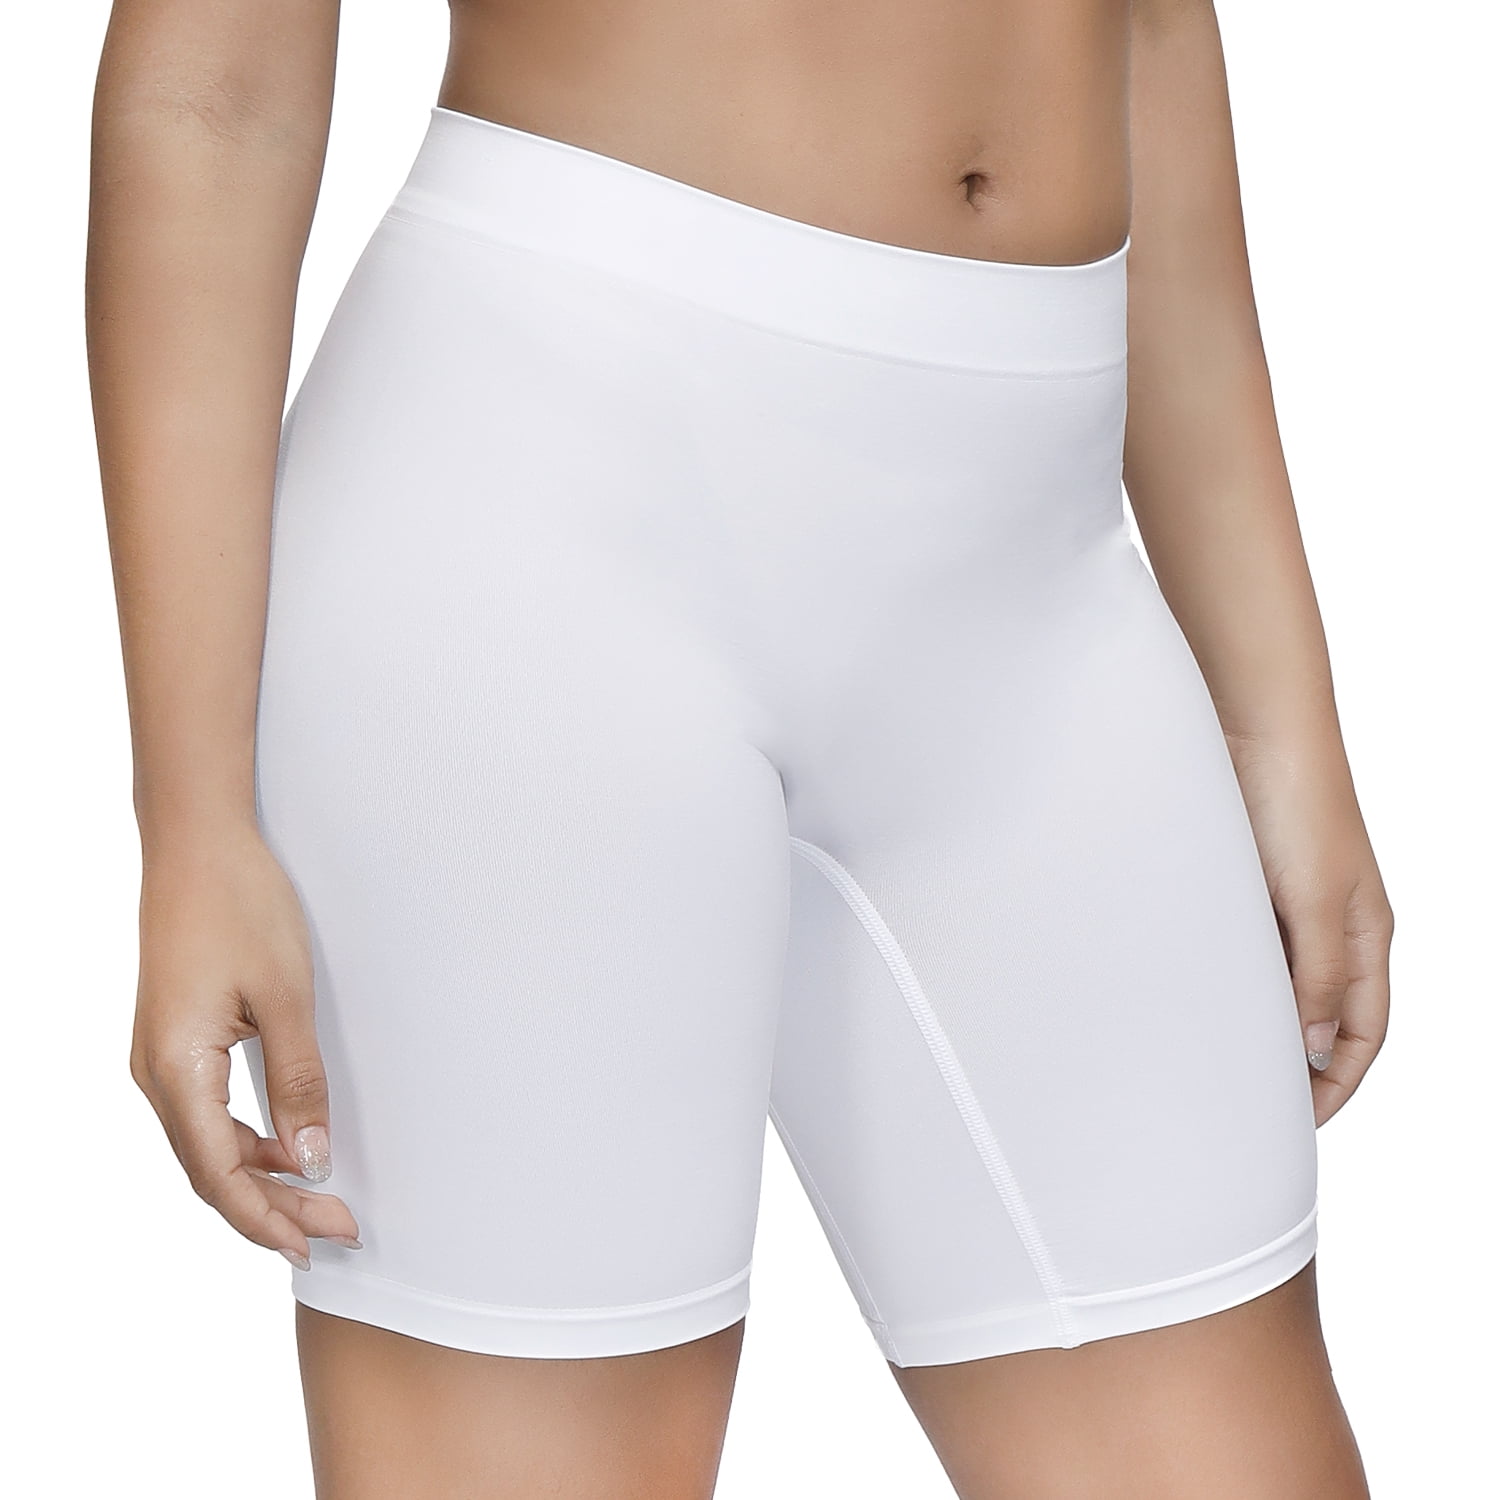 Molasus Incontinence Underwear for Women 